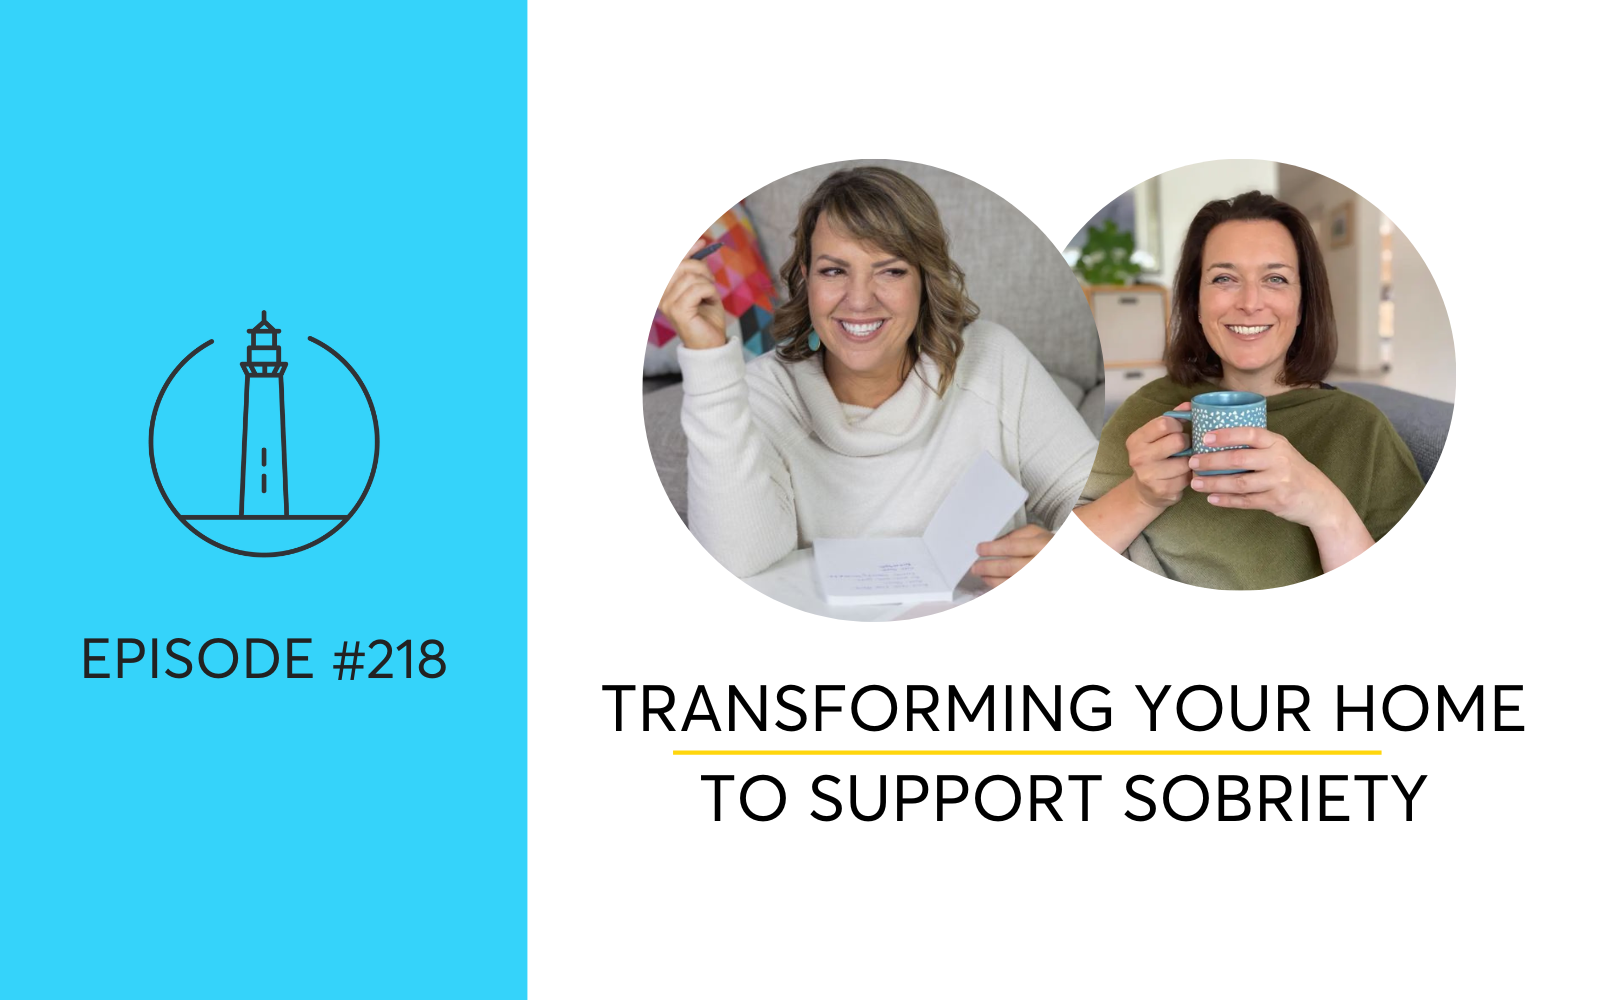 How To Transform Your Home To Reduce Triggers To Drink and Support Your Sobriety